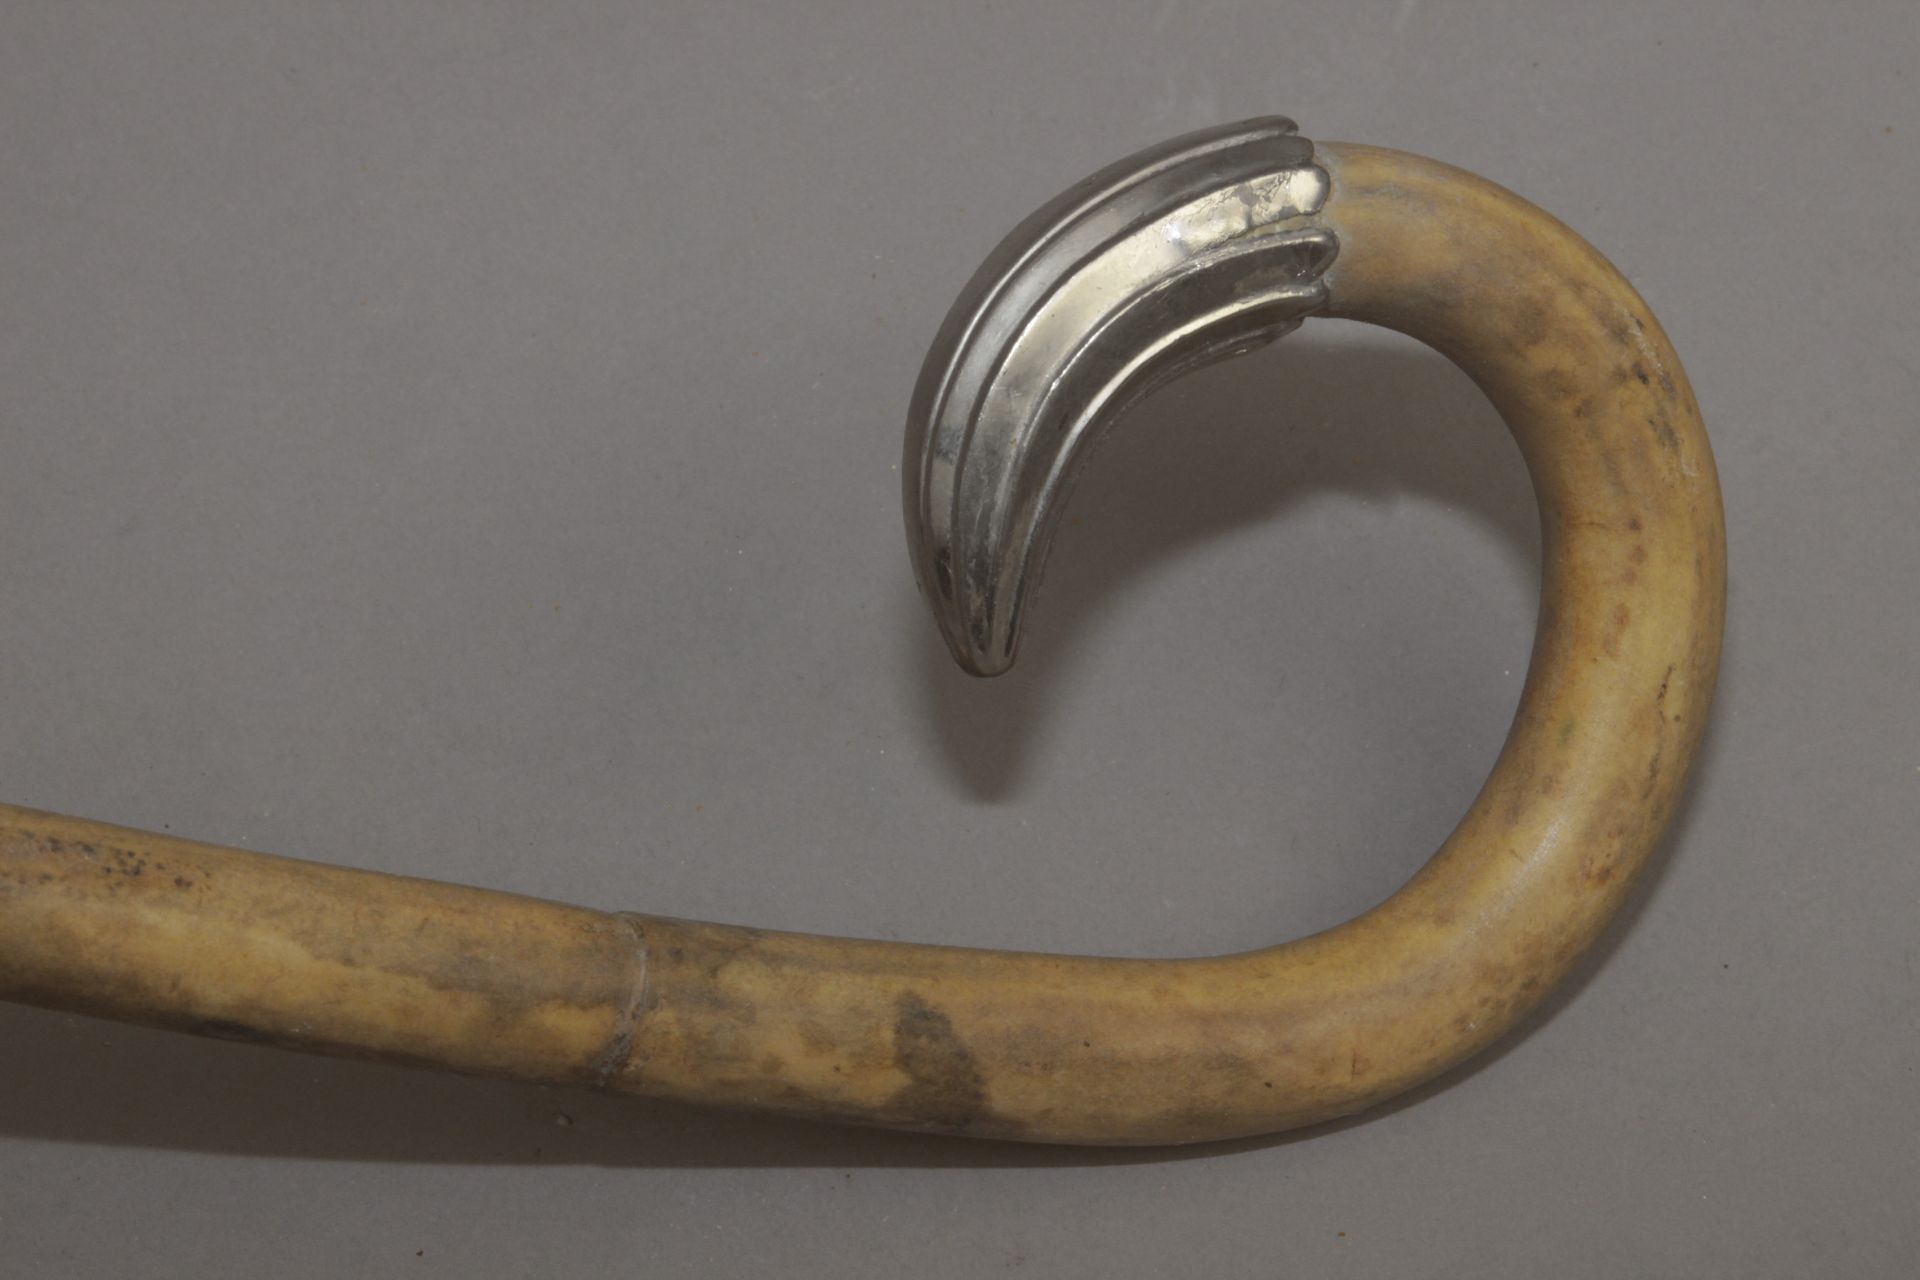 A wooden curved walking stick circa 1900 - Image 4 of 4